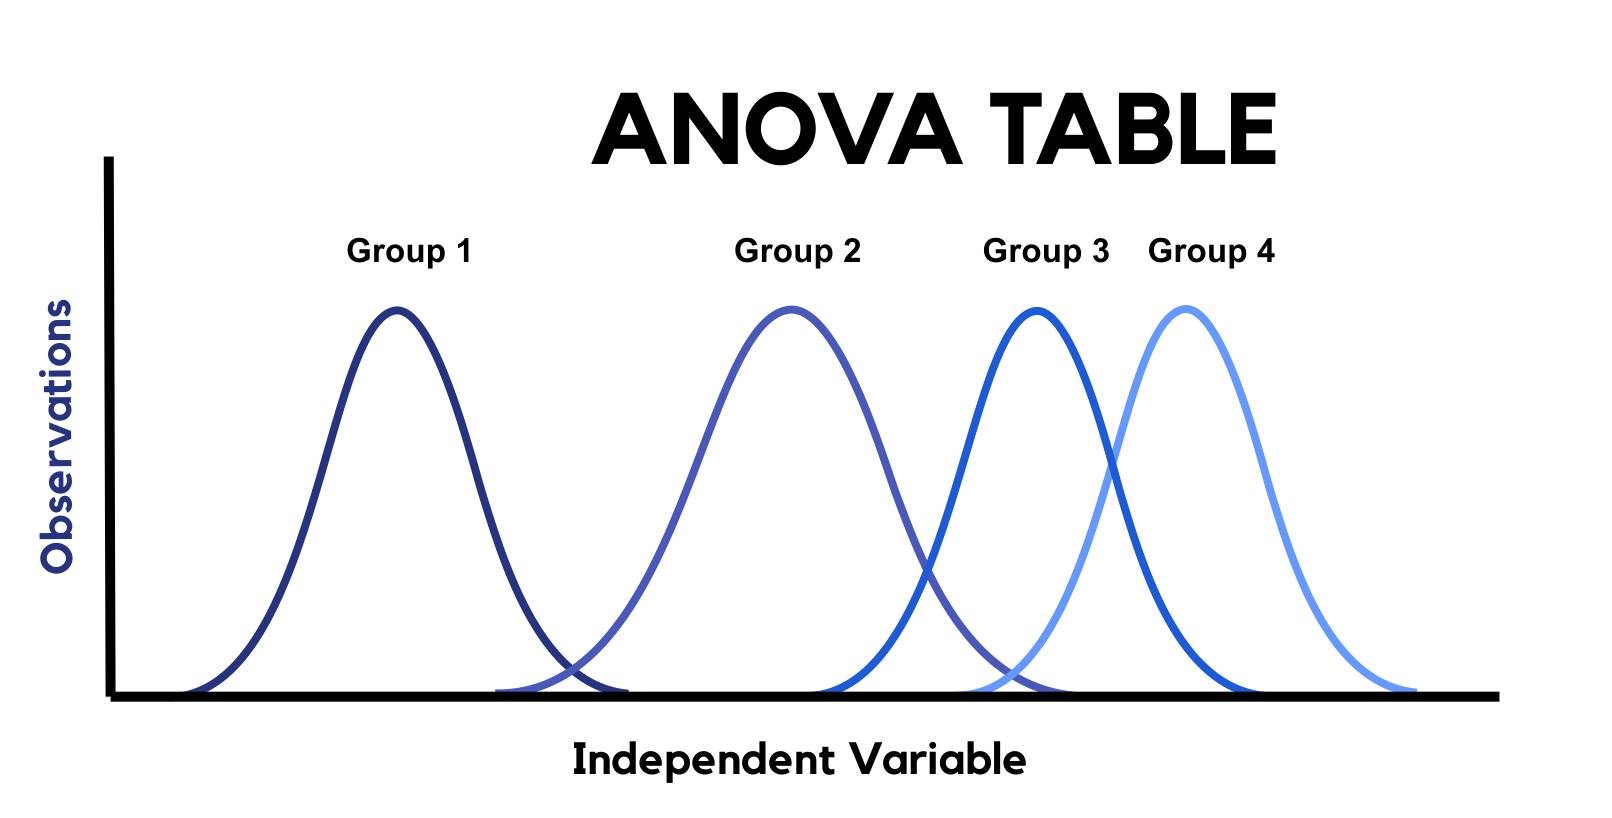 research study that used anova